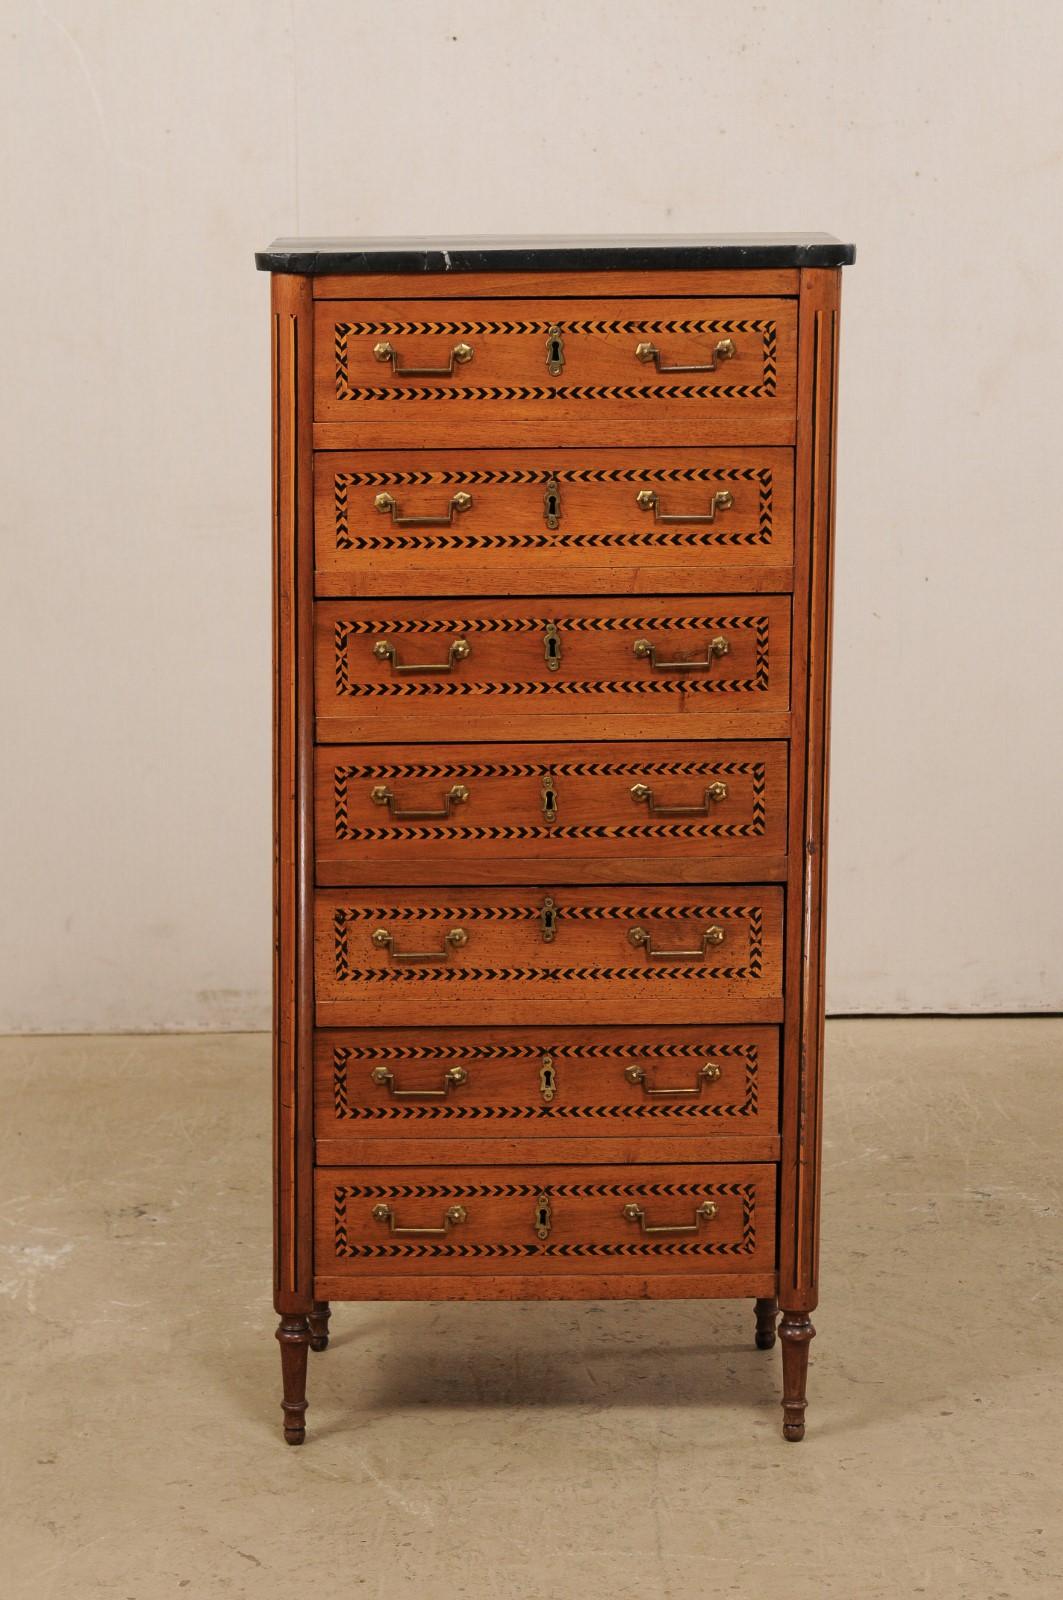 A French Louis XVI lingerie chest from the early 19th century. This antique chest from France features a semainier (or semaniere) design of seven drawers, typically used for storing lingerie or linens. This piece has been painted with a faux-marble